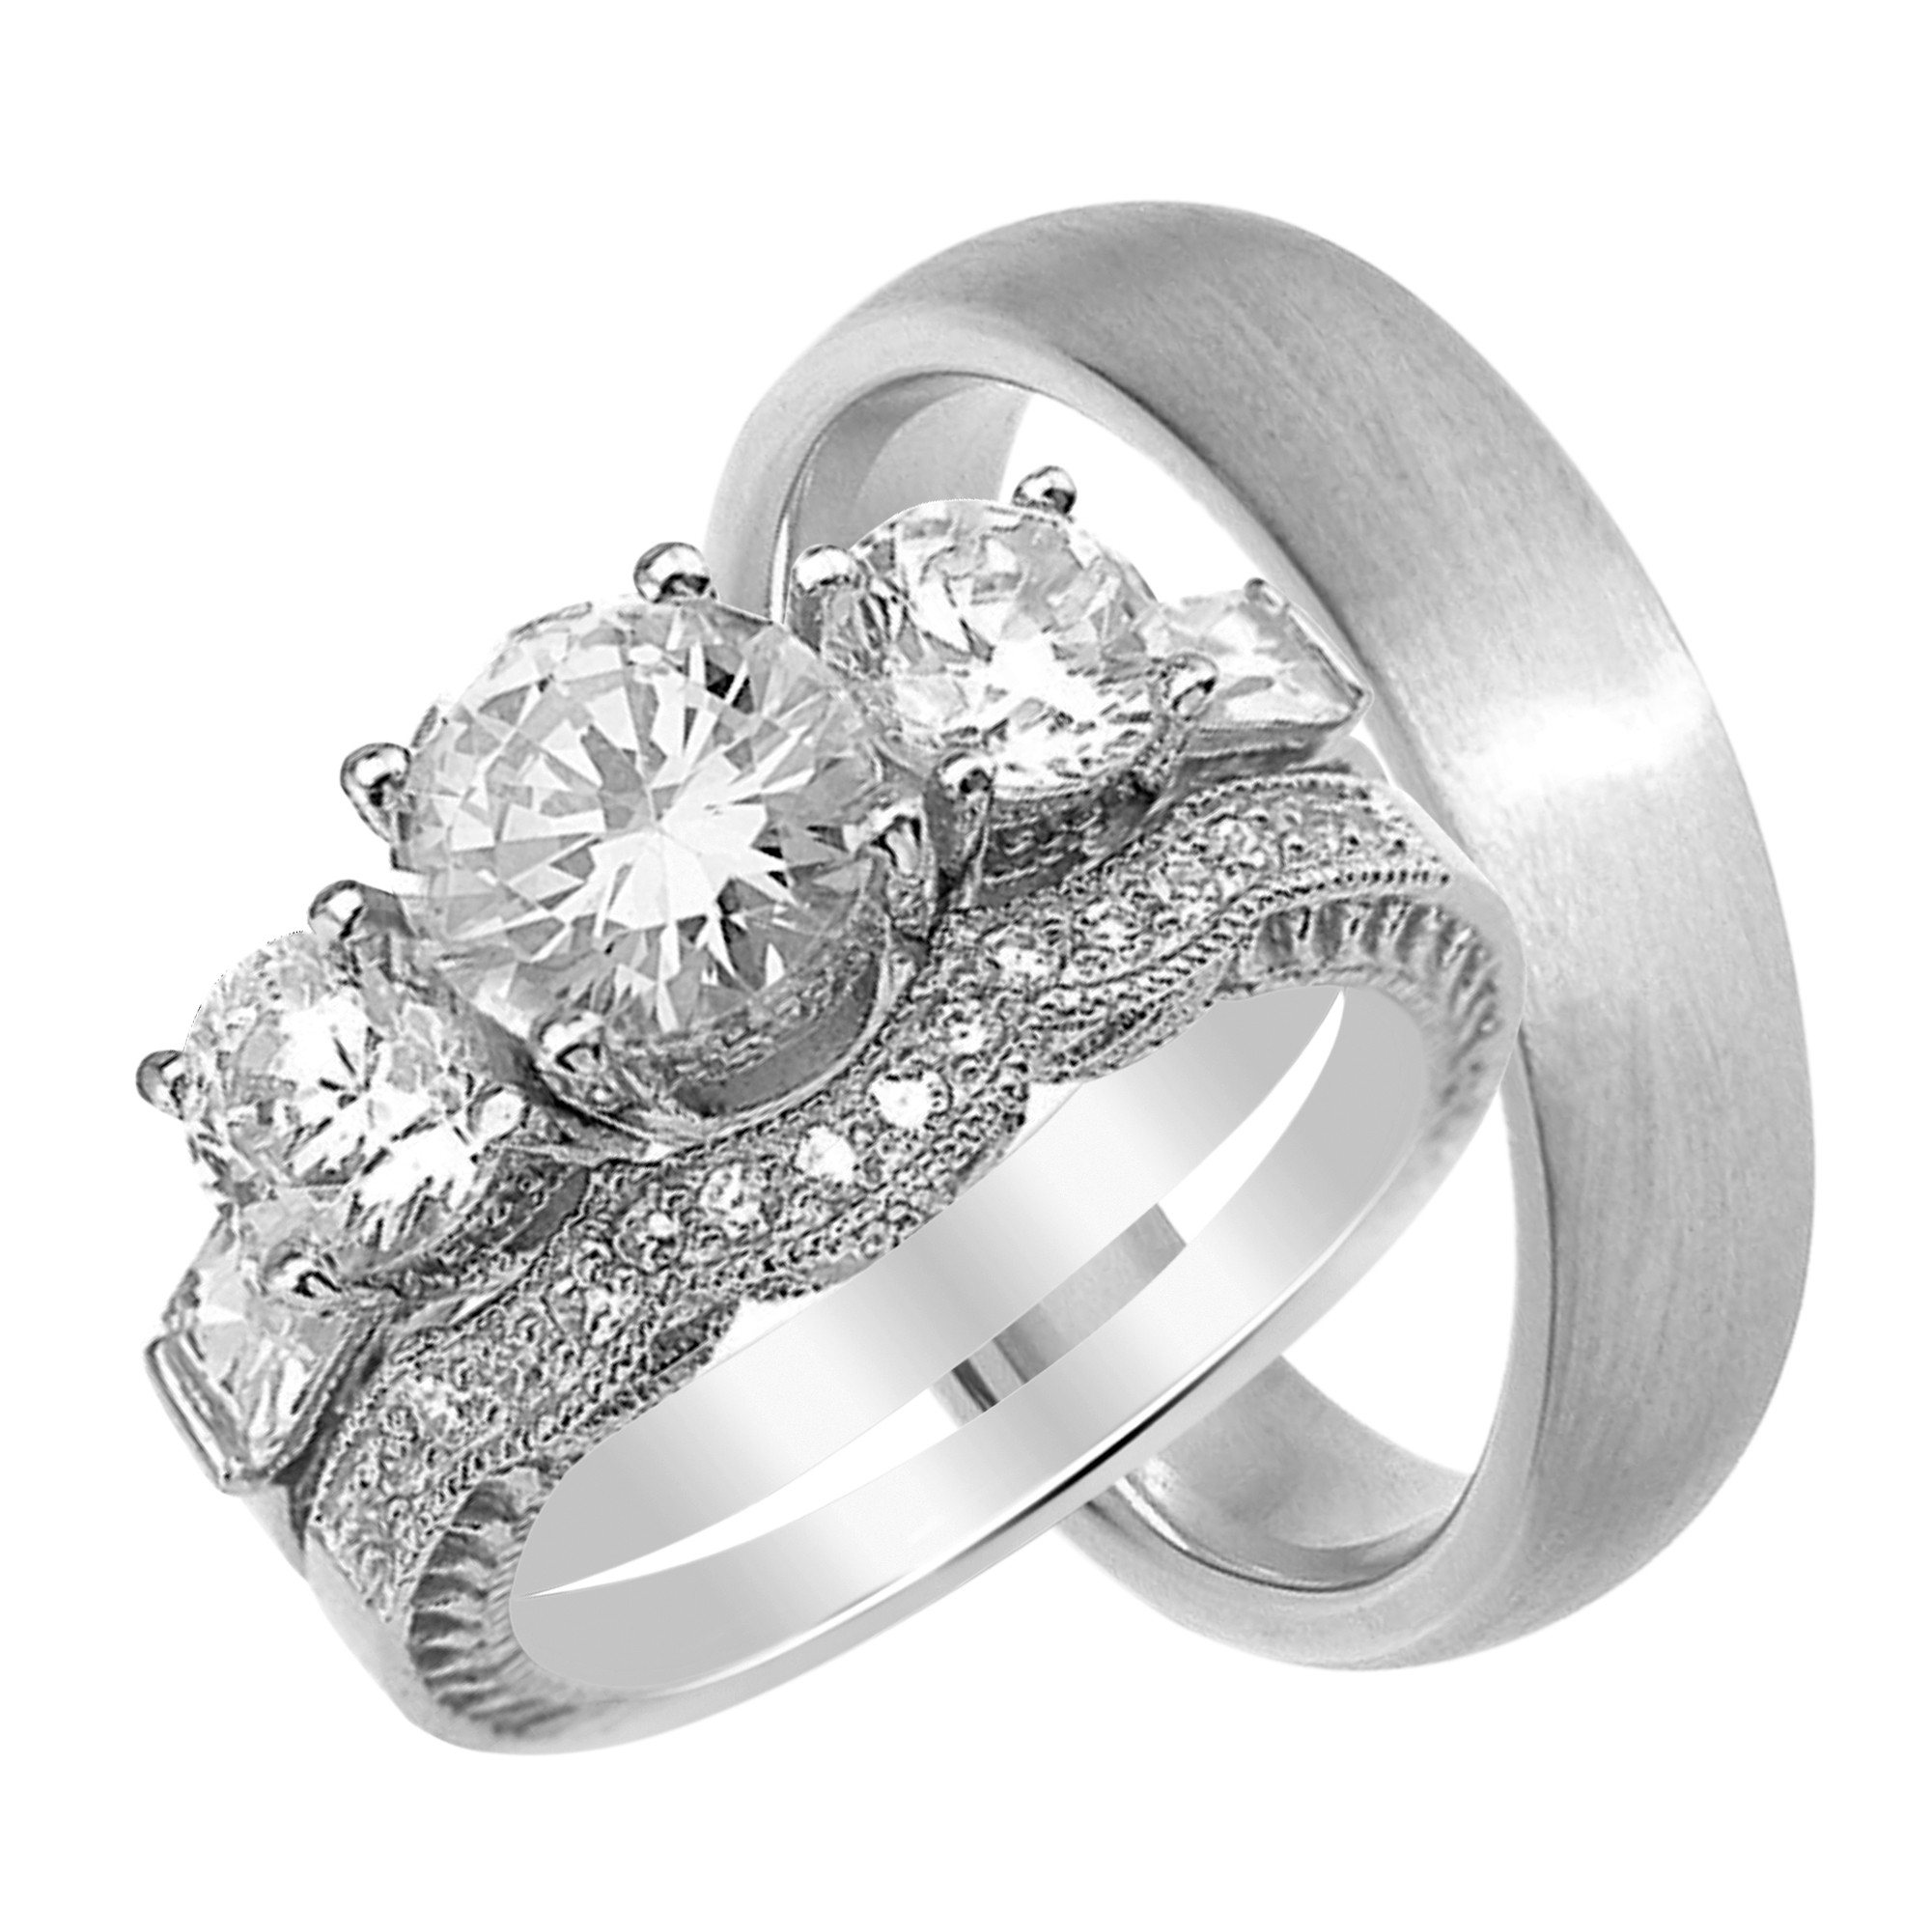 Wedding Rings Sets At Walmart
 LaRaso & Co His and Hers Wedding Ring Set Sterling